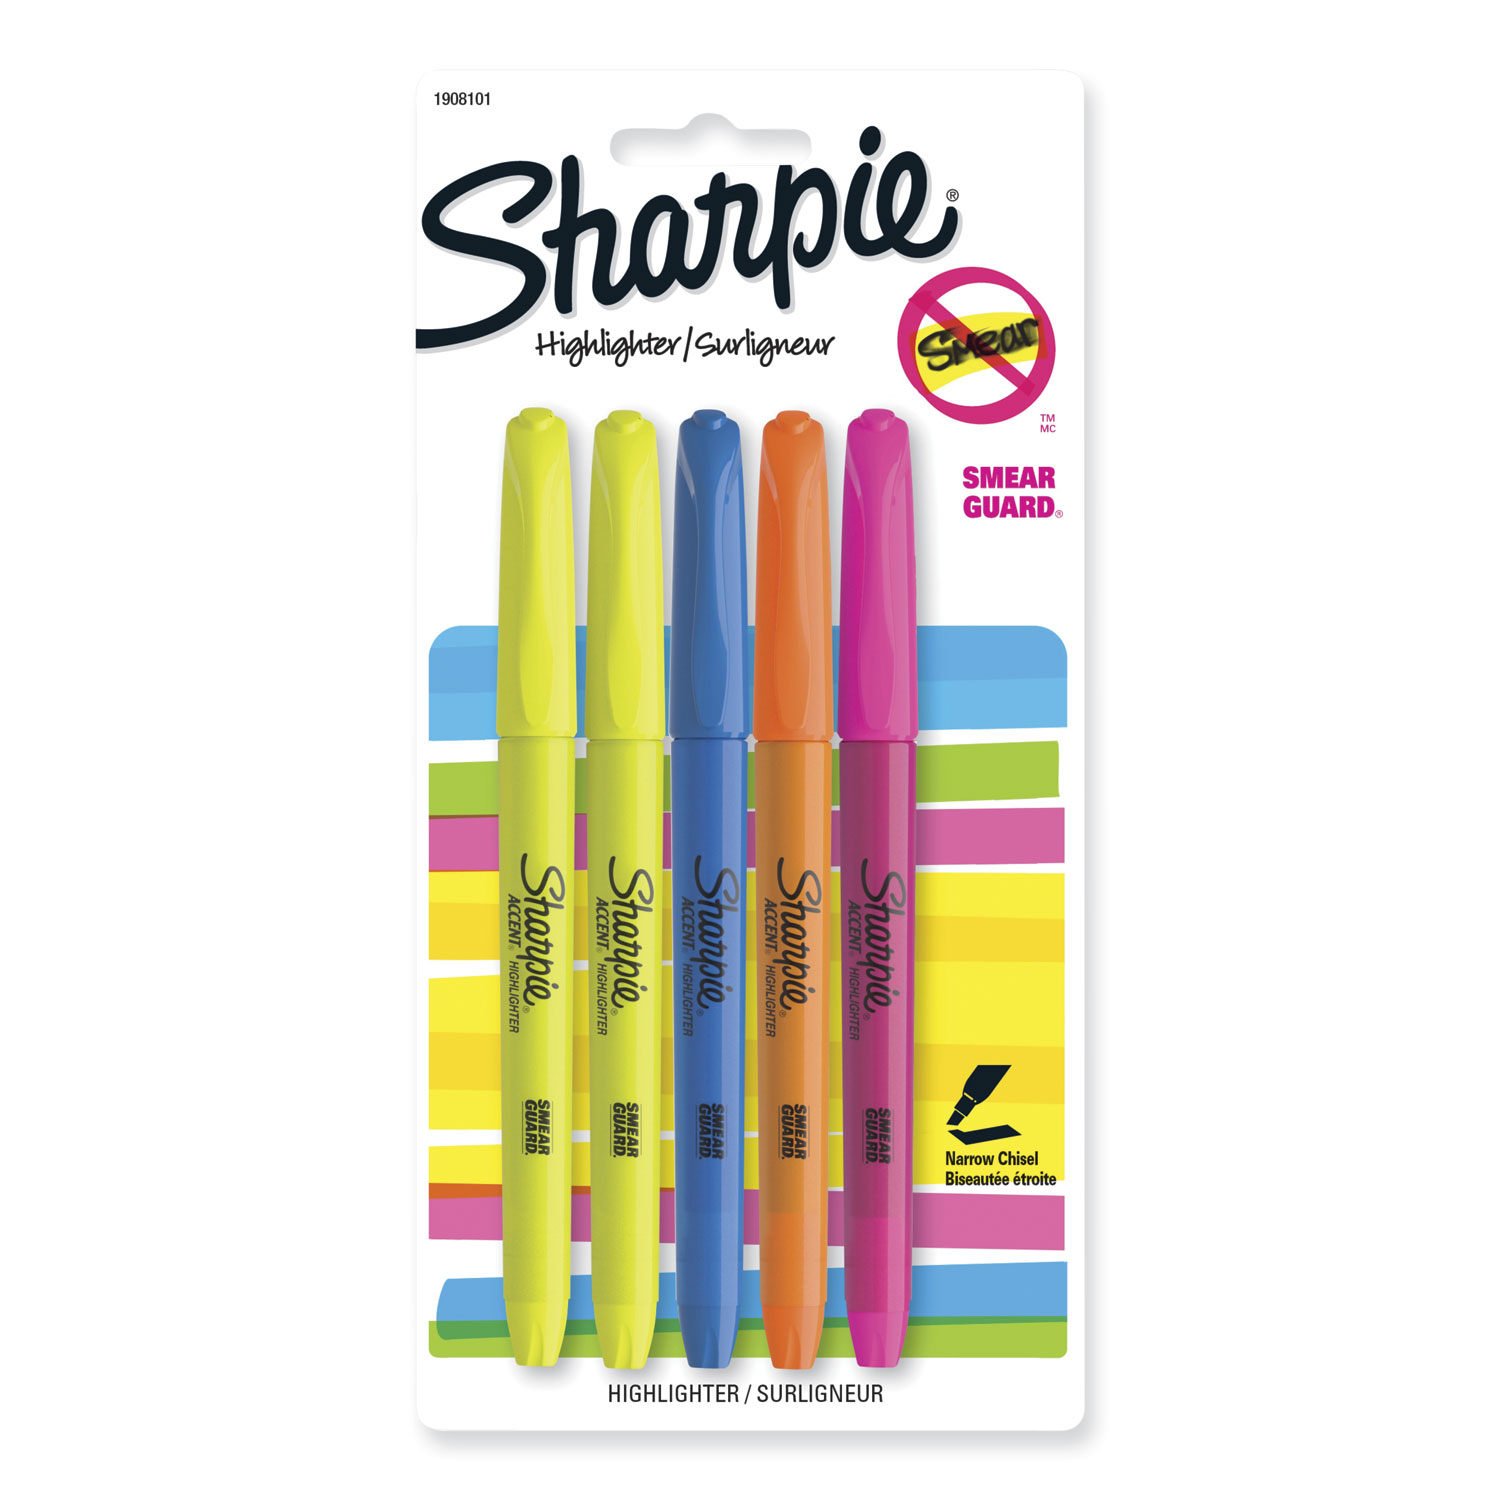 Sharpie S-Note Creative Markers, Assorted Ink Colors, Chisel Tip